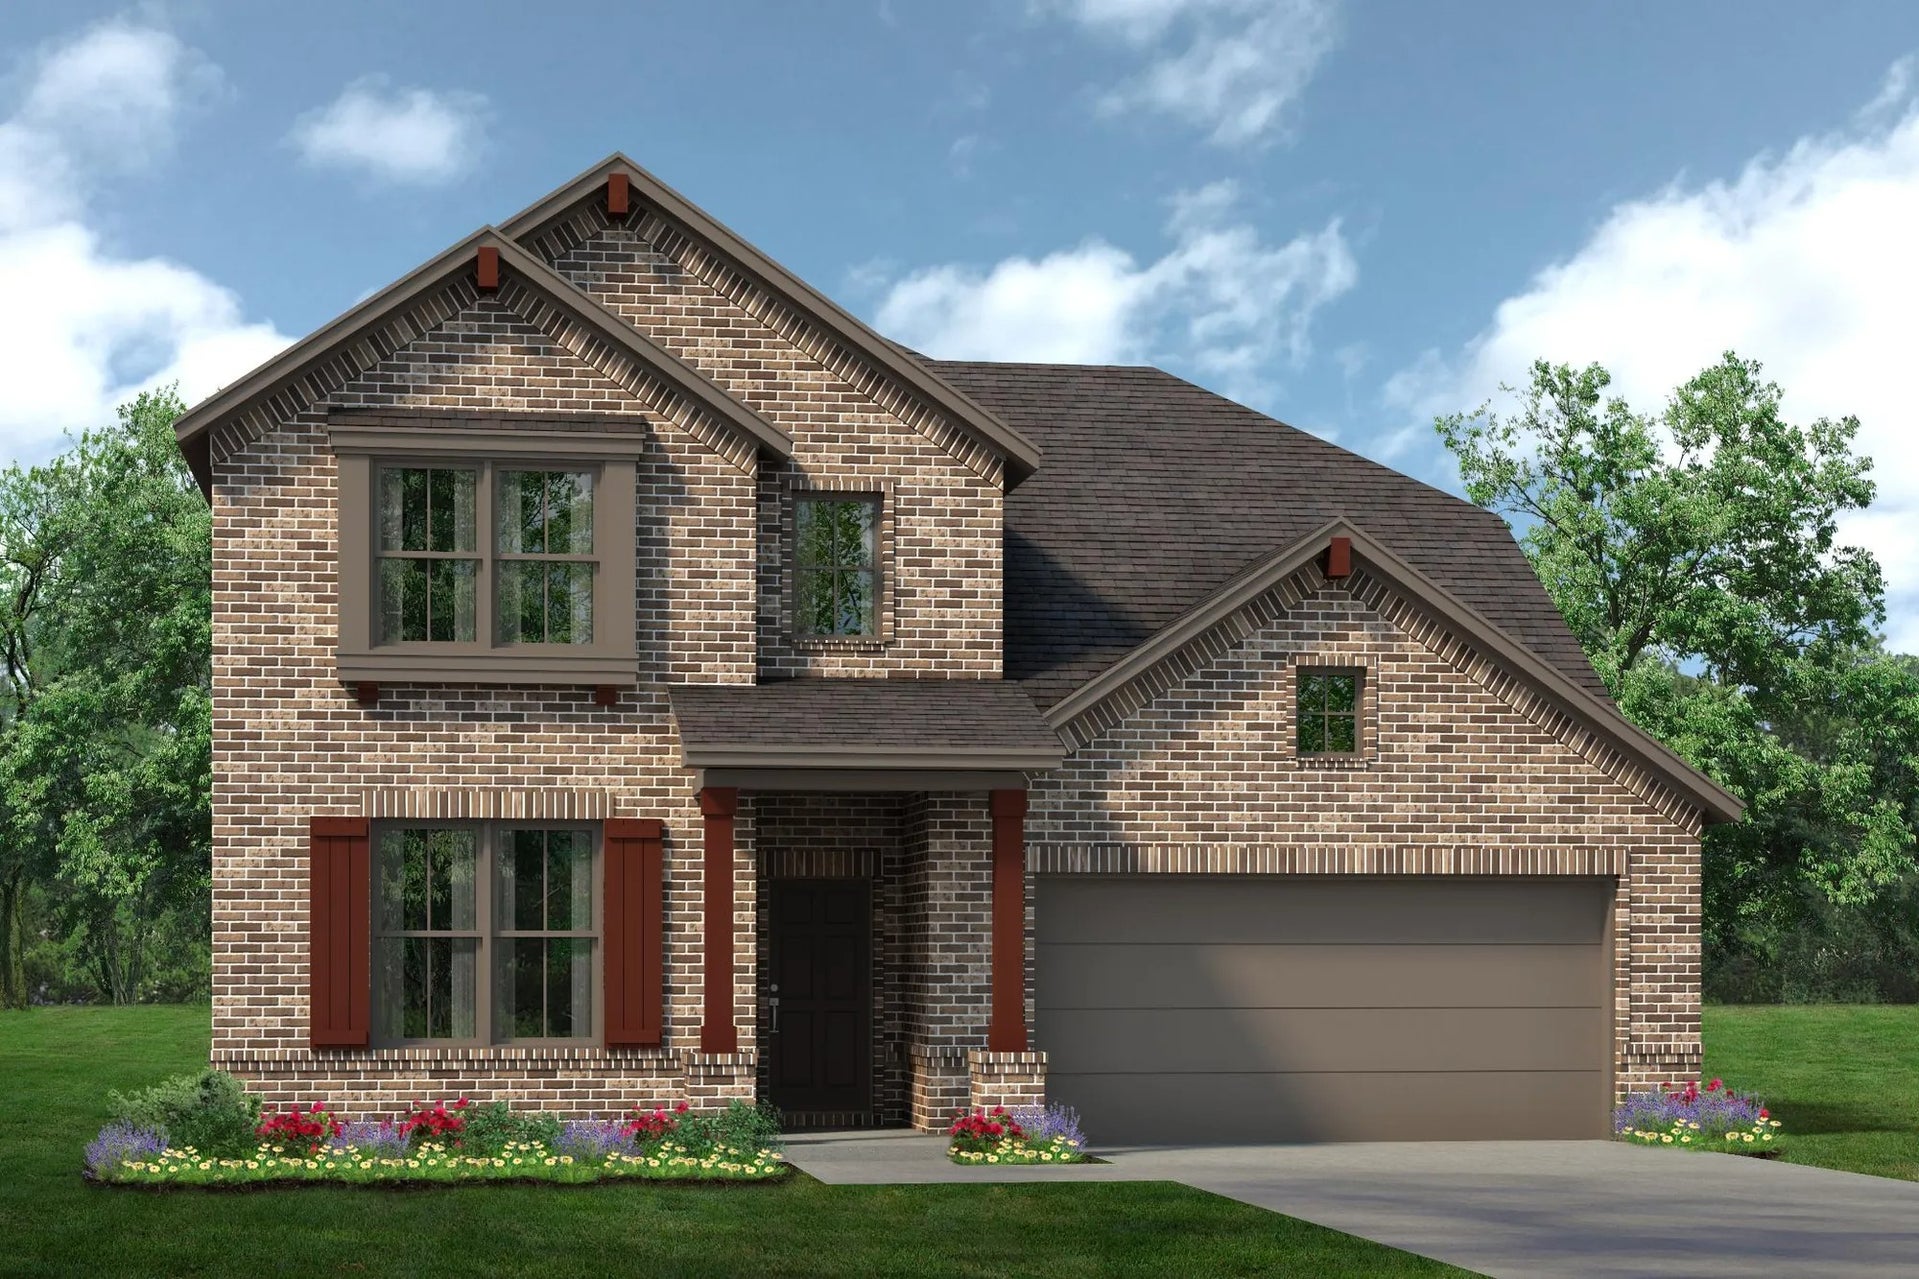 2440 C. 3br New Home in Crowley, TX